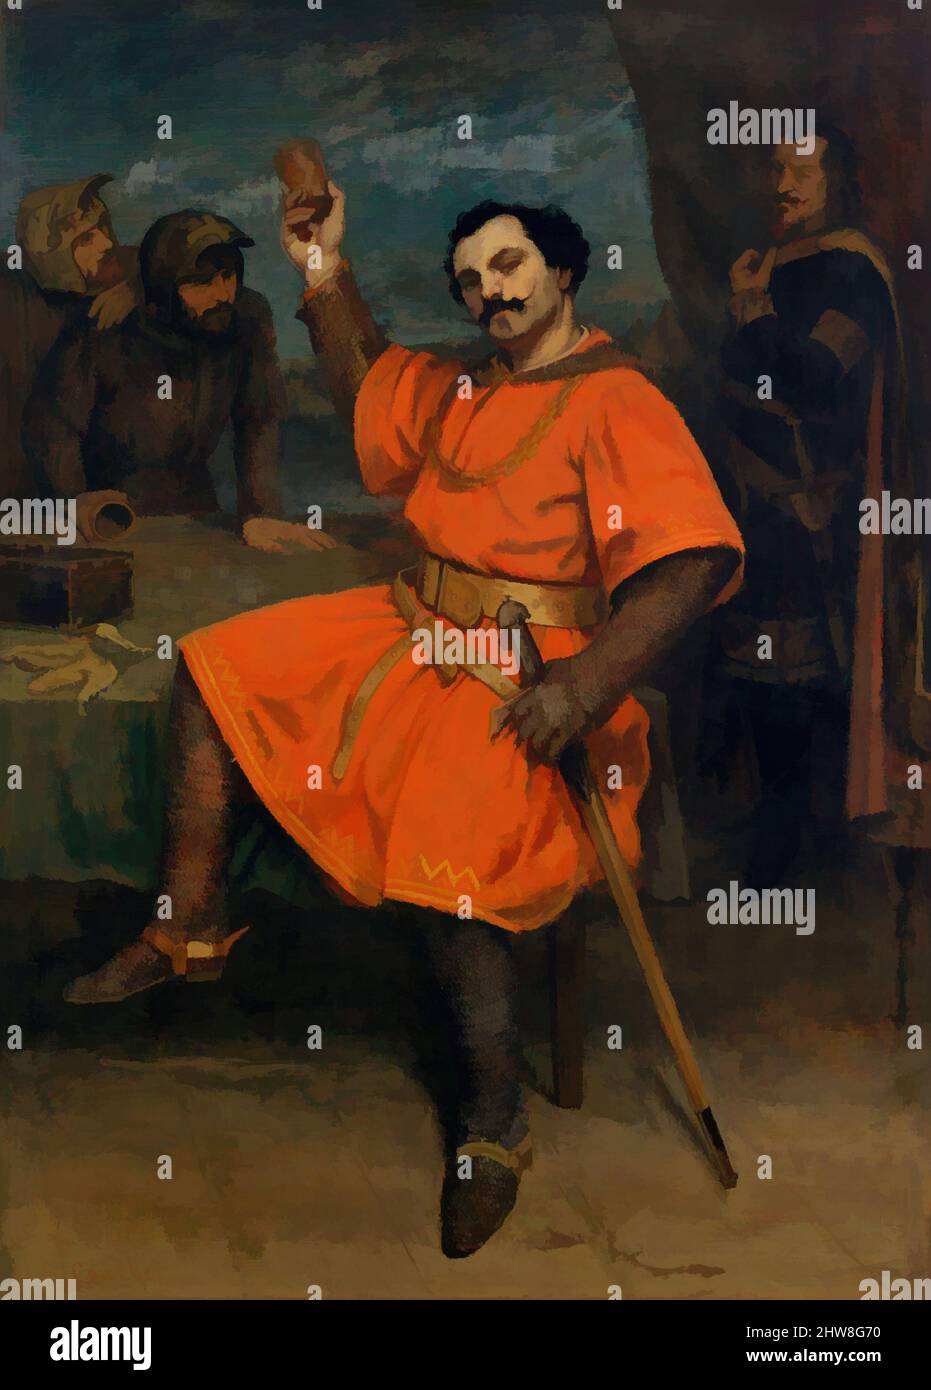 Art inspired by Louis Gueymard (1822–1880) as Robert le Diable, 1857, Oil on canvas, 58 1/2 x 42 in. (148.6 x 106.7 cm), Paintings, Gustave Courbet (French, Ornans 1819–1877 La Tour-de-Peilz), This painting, shown at the Salon of 1857, depicts the tenor Louis Gueymard in his most, Classic works modernized by Artotop with a splash of modernity. Shapes, color and value, eye-catching visual impact on art. Emotions through freedom of artworks in a contemporary way. A timeless message pursuing a wildly creative new direction. Artists turning to the digital medium and creating the Artotop NFT Stock Photo